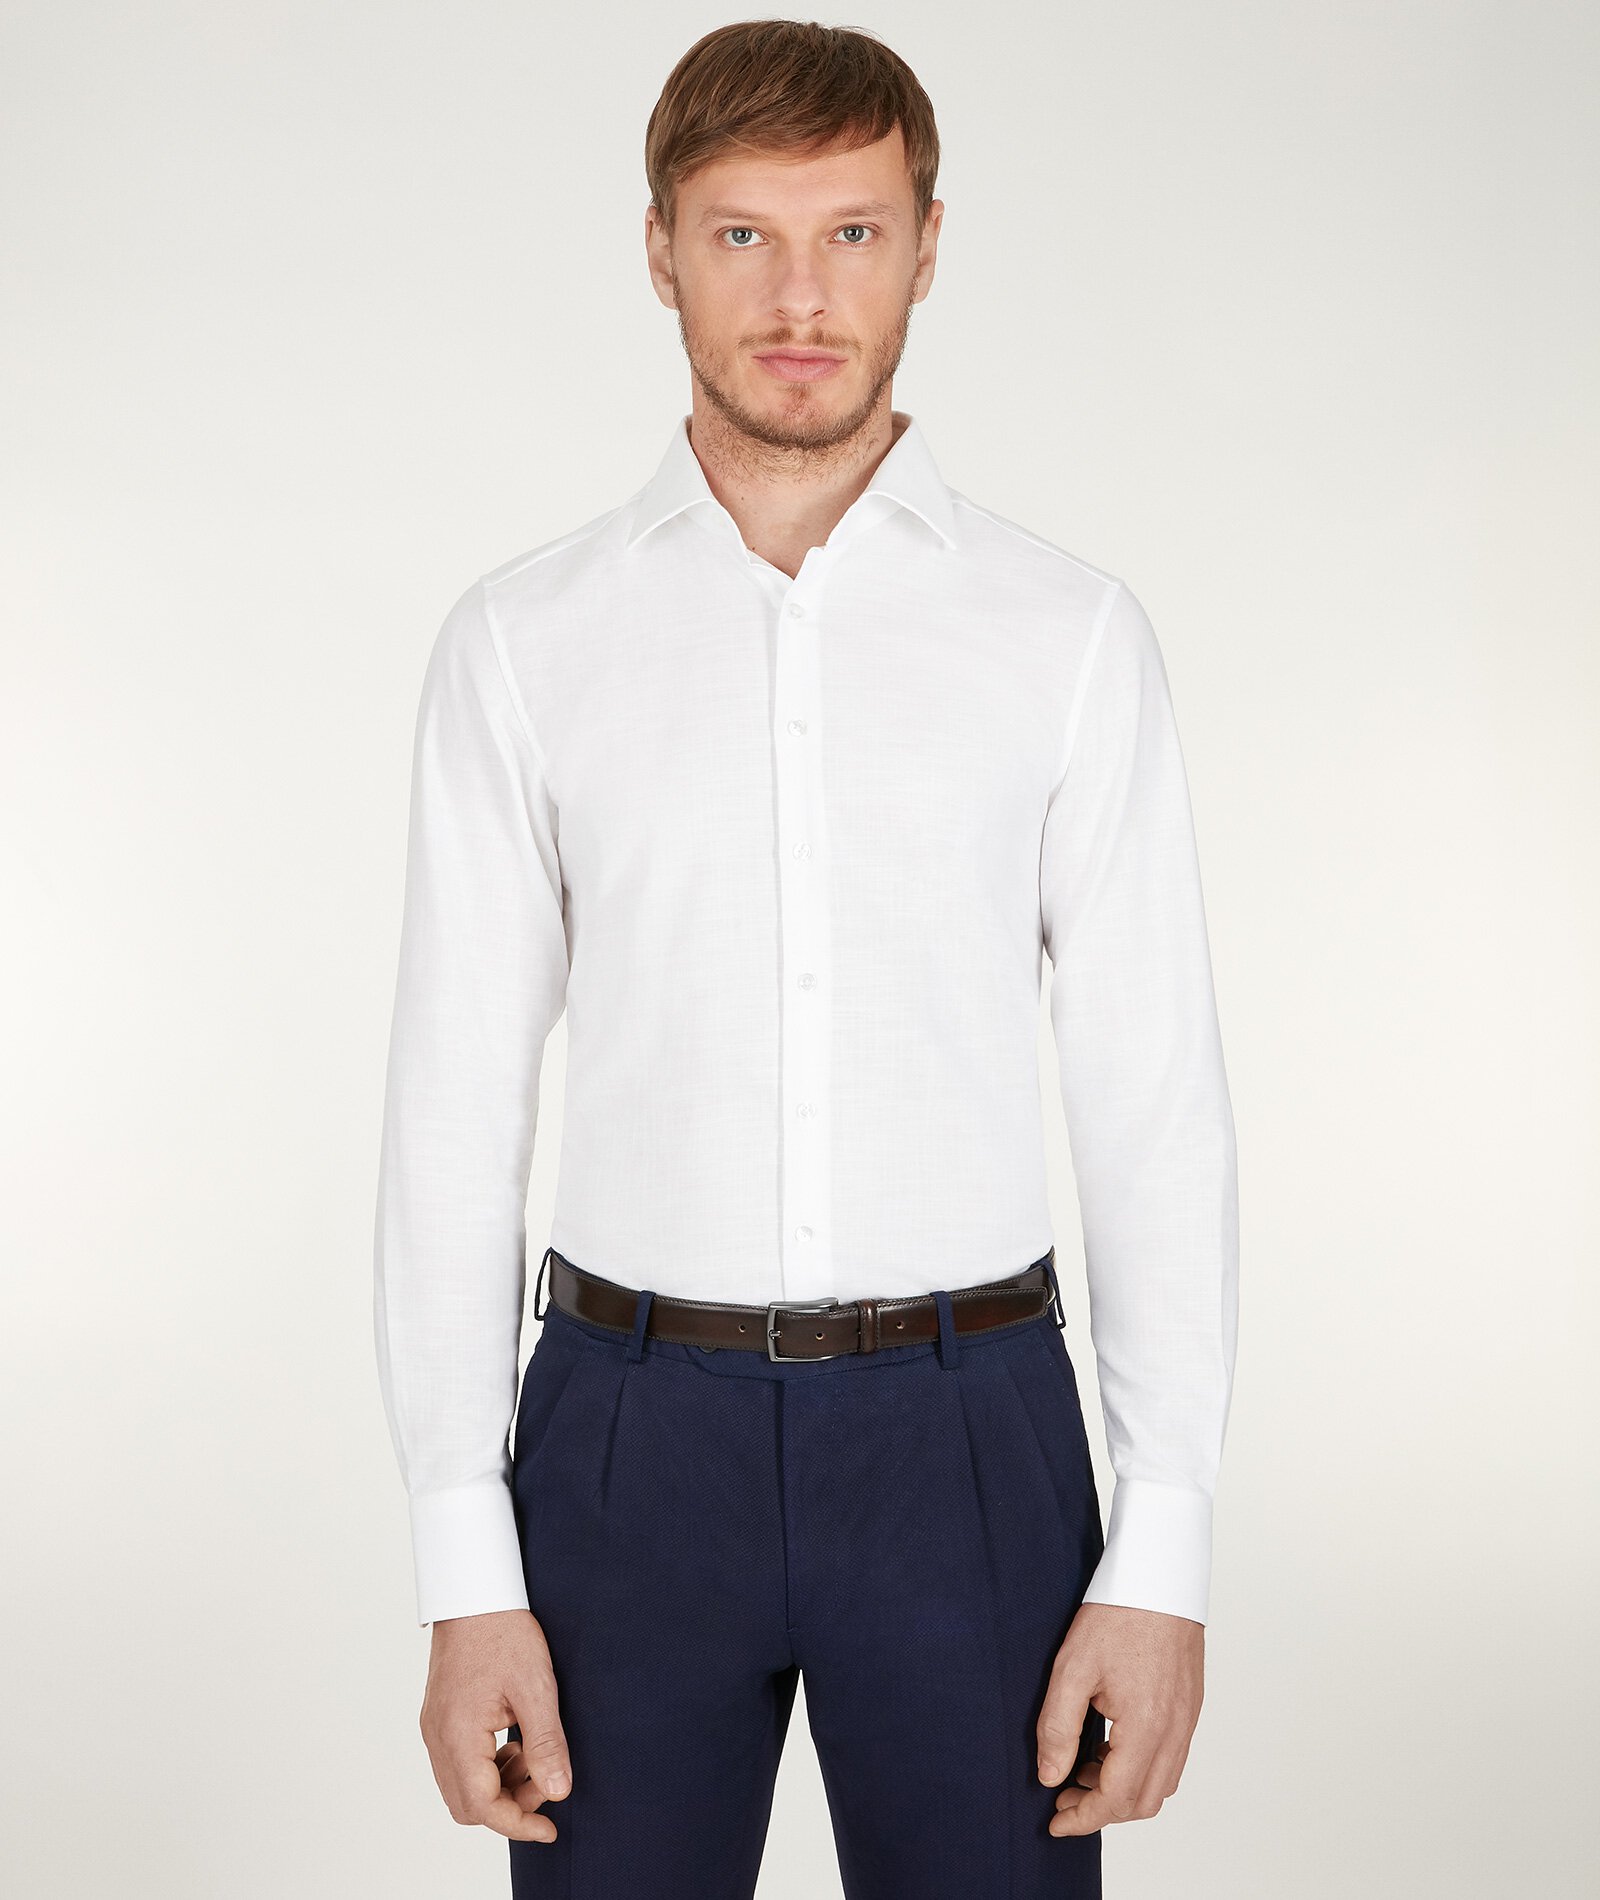 Pinpoint White Cotton Men's Tailored Shirt for Ultimate Style | Lanieri